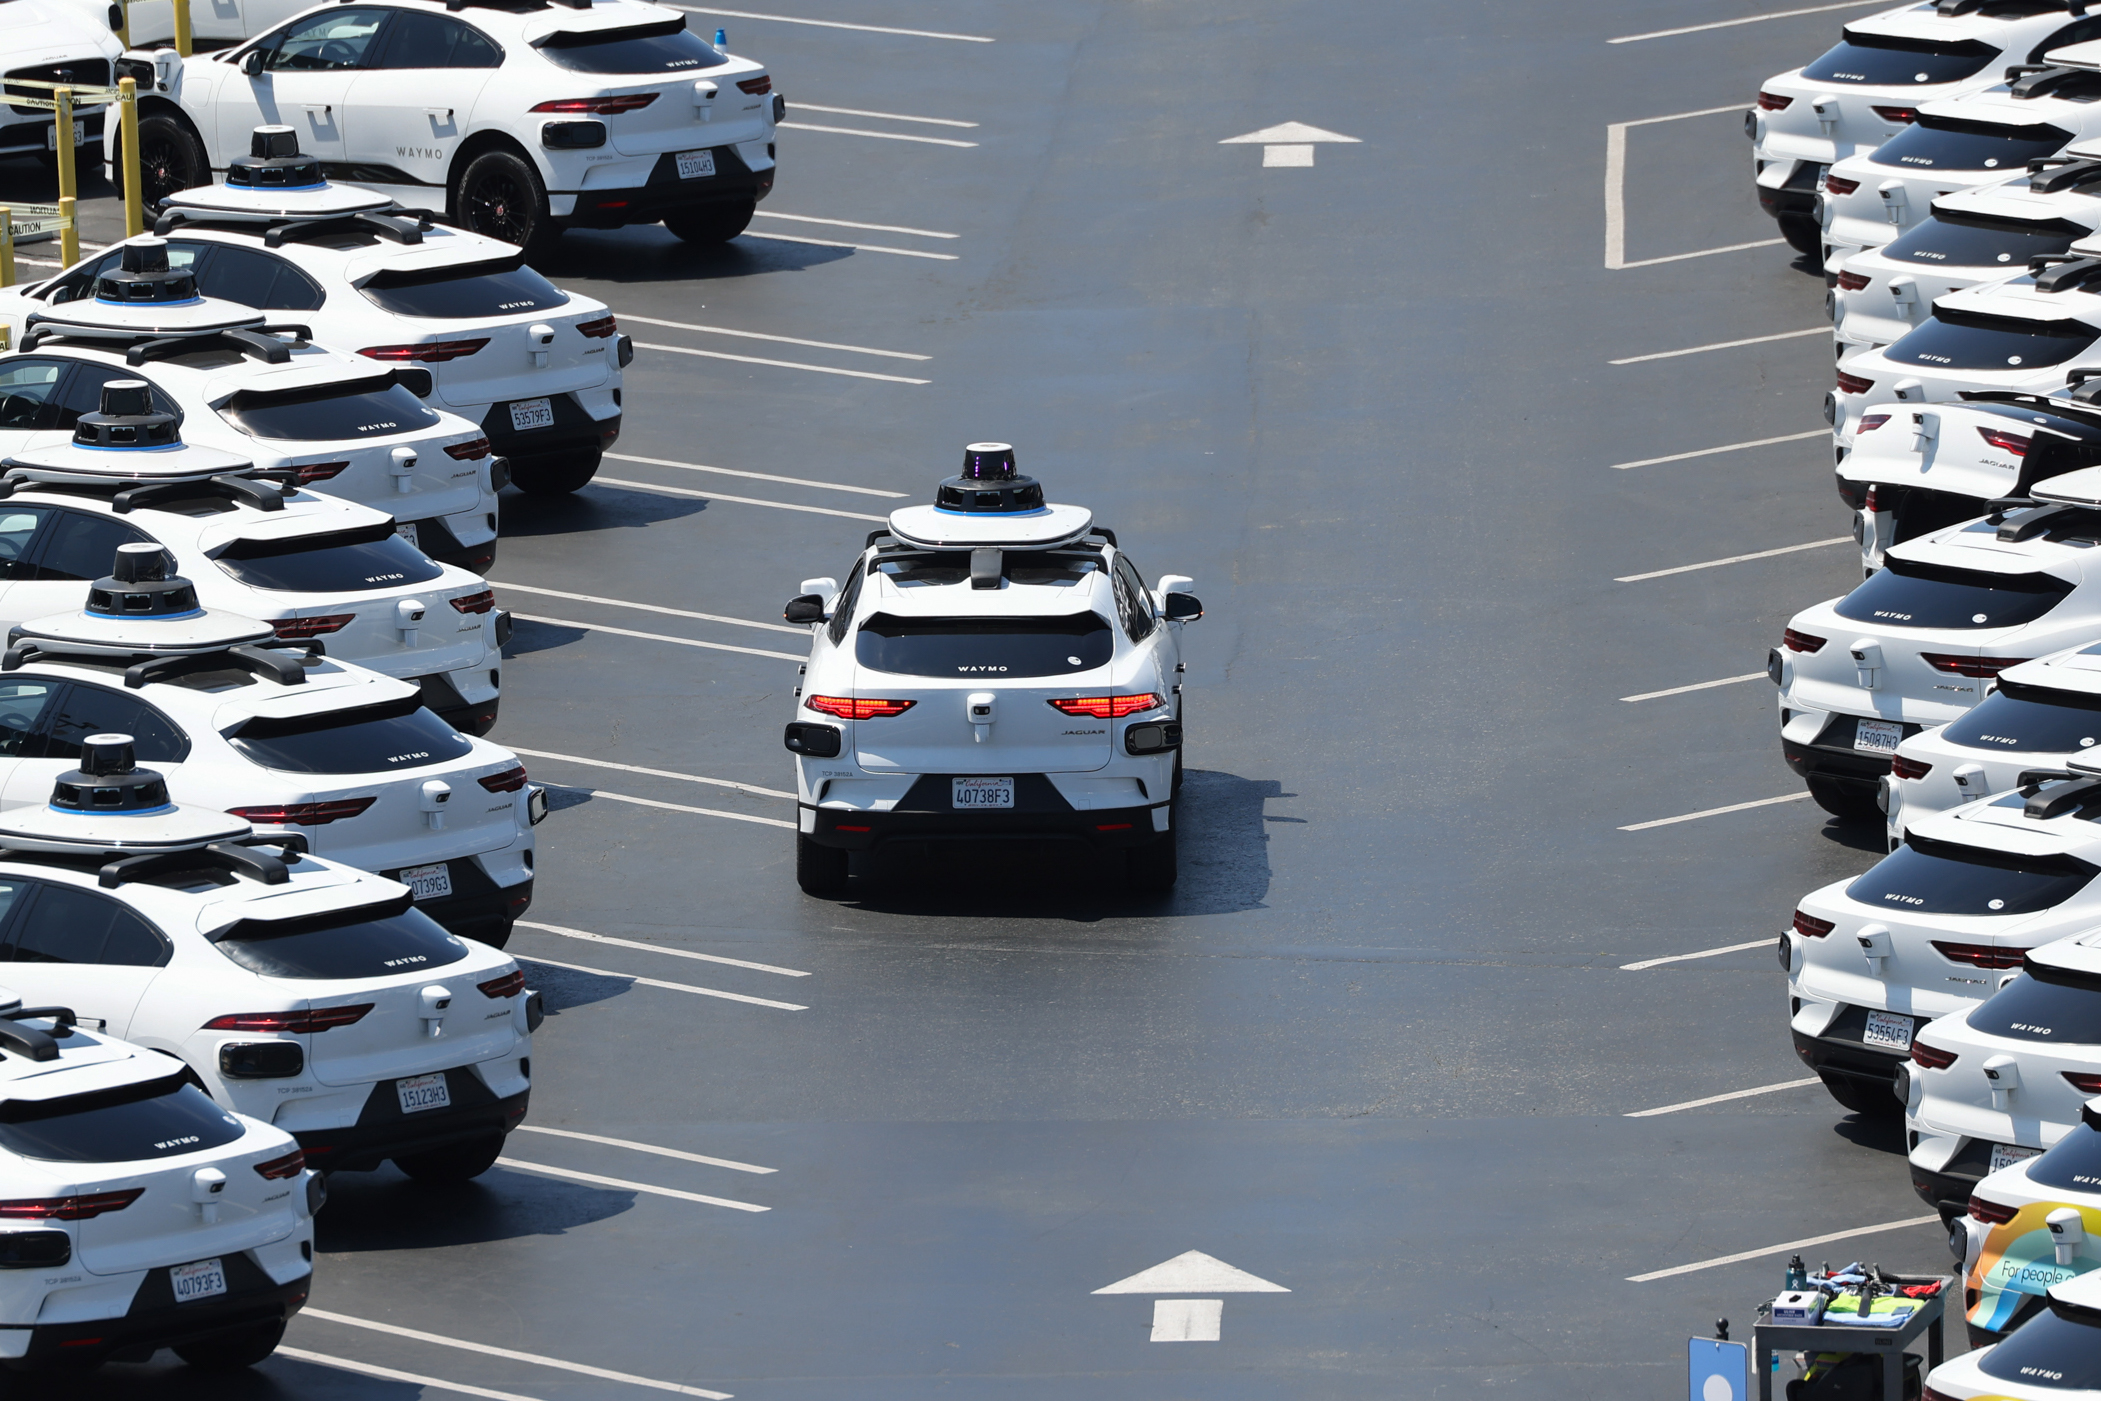 The image depicts numerous identical white SUVs equipped with sensors, parked in an organized manner in a parking lot, with one SUV driving down the central lane.